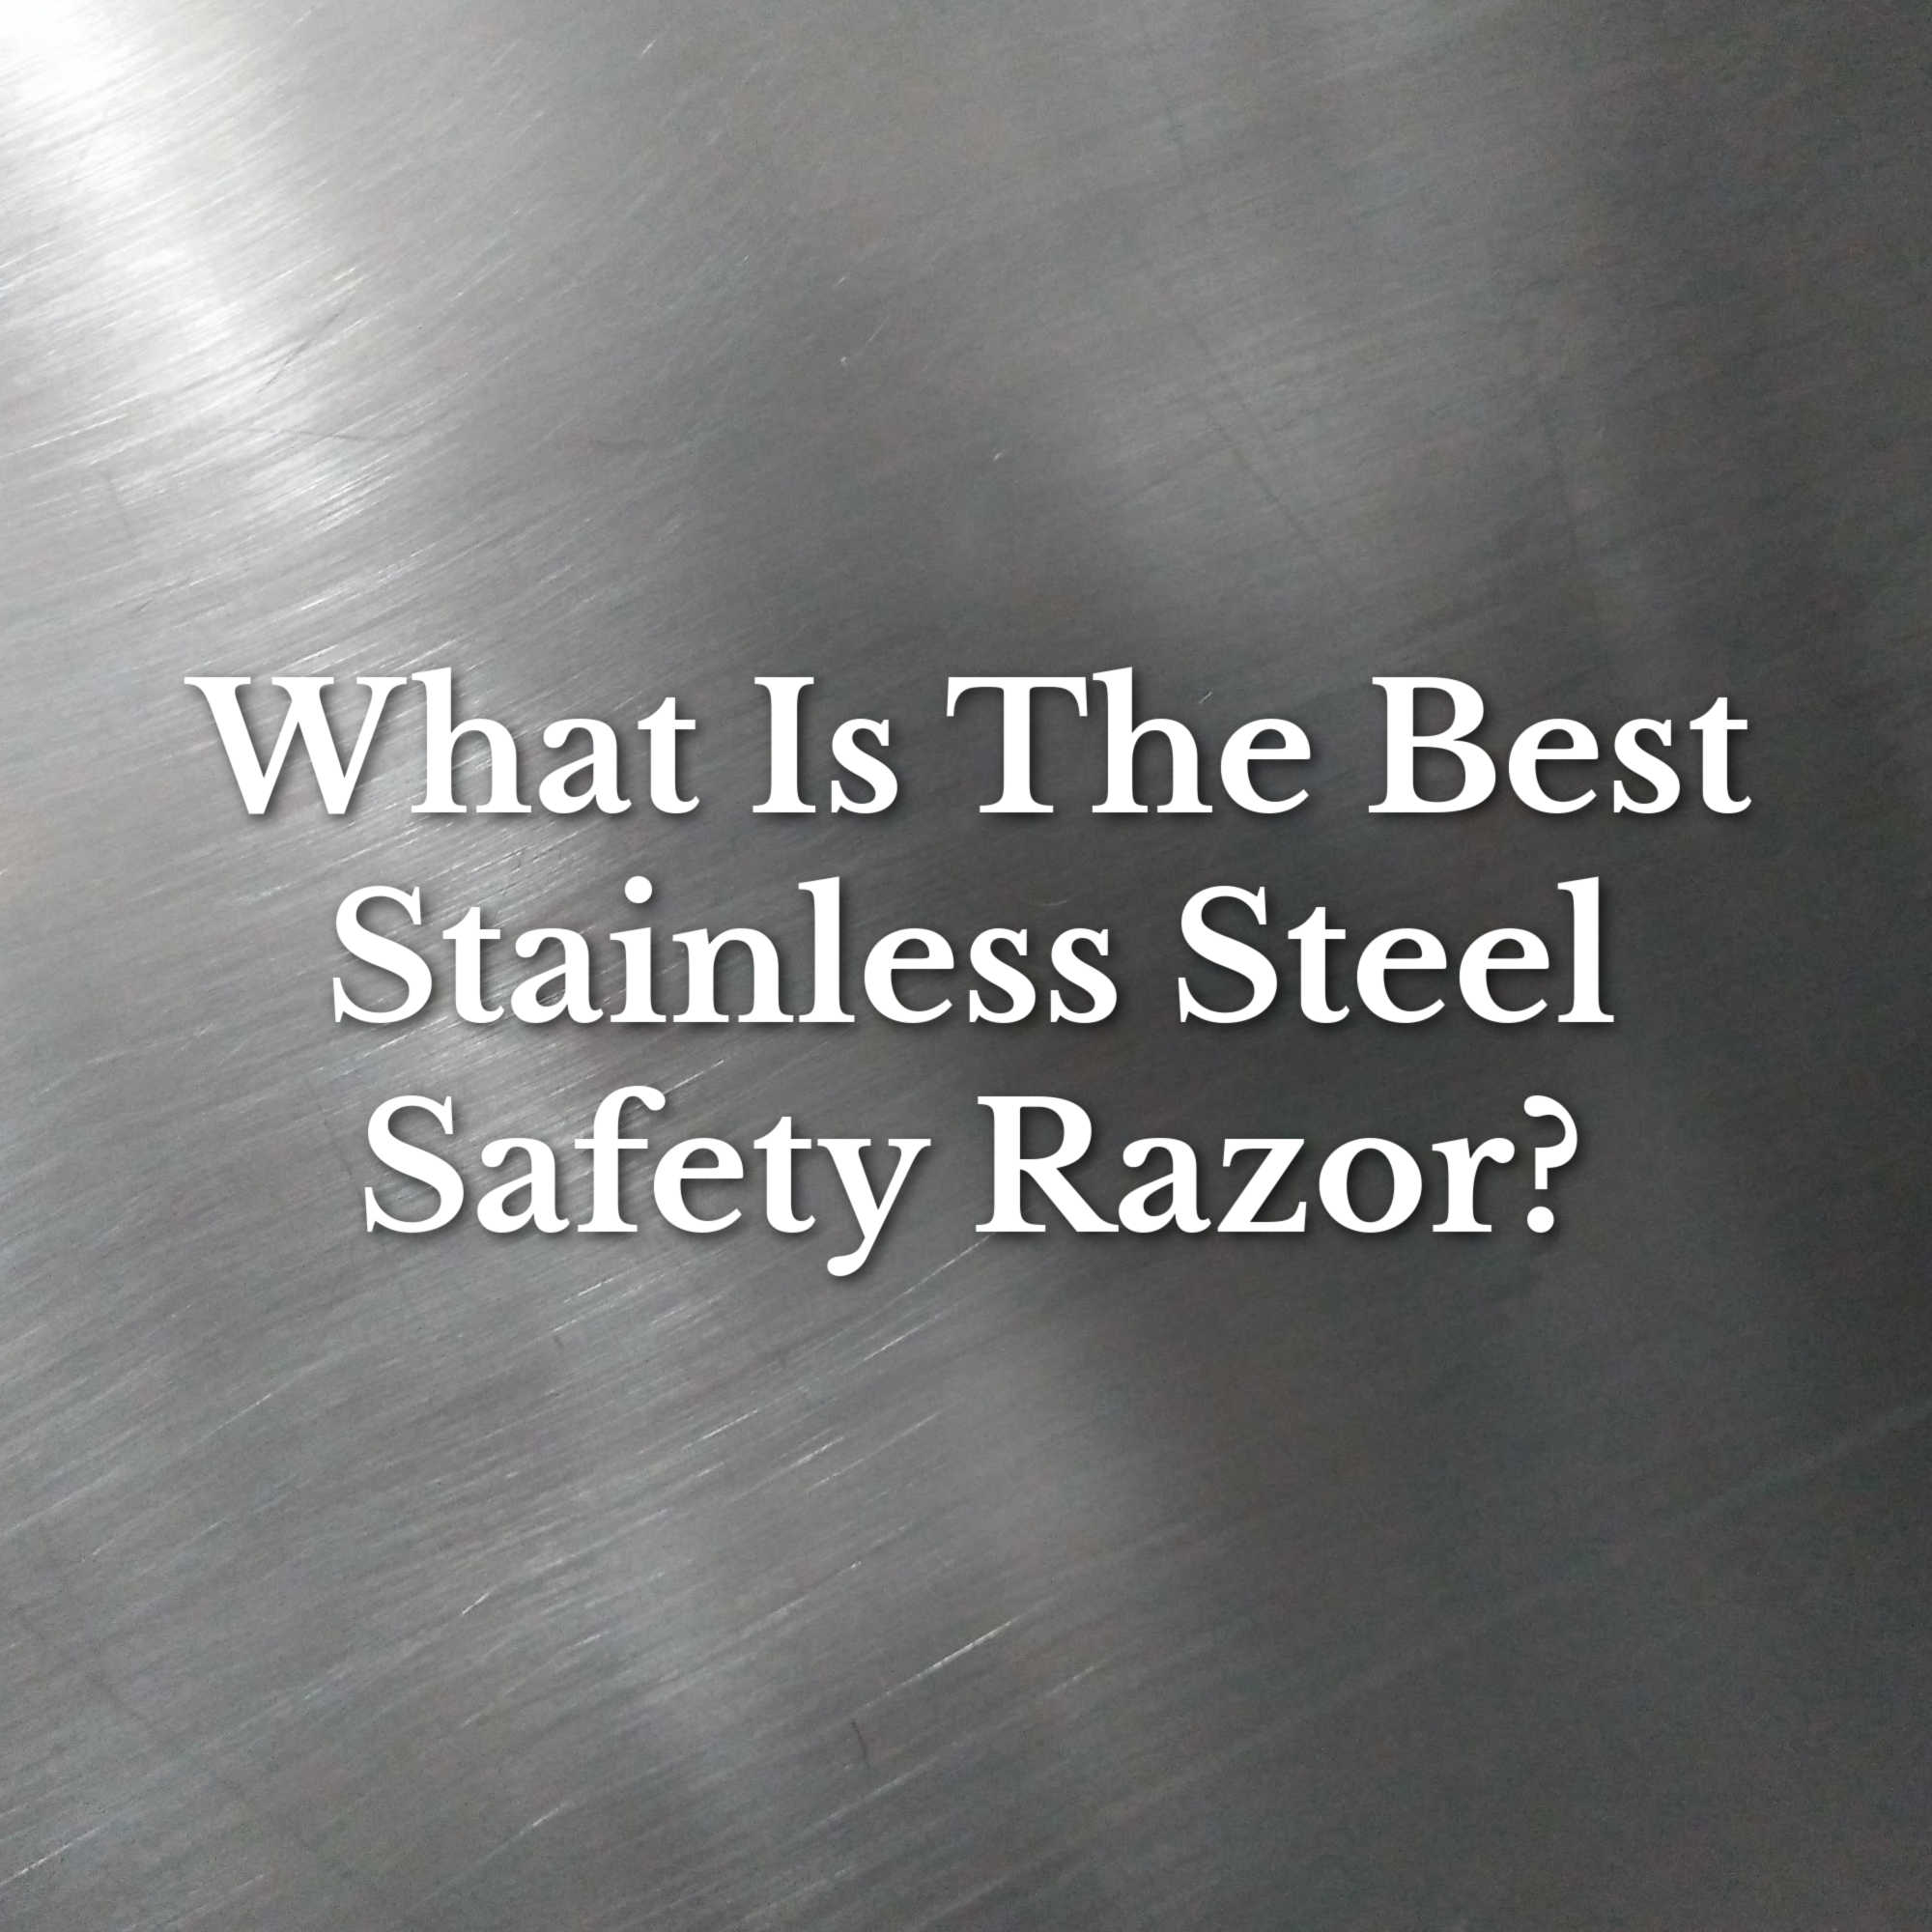 what is the best stainless steel safety razor